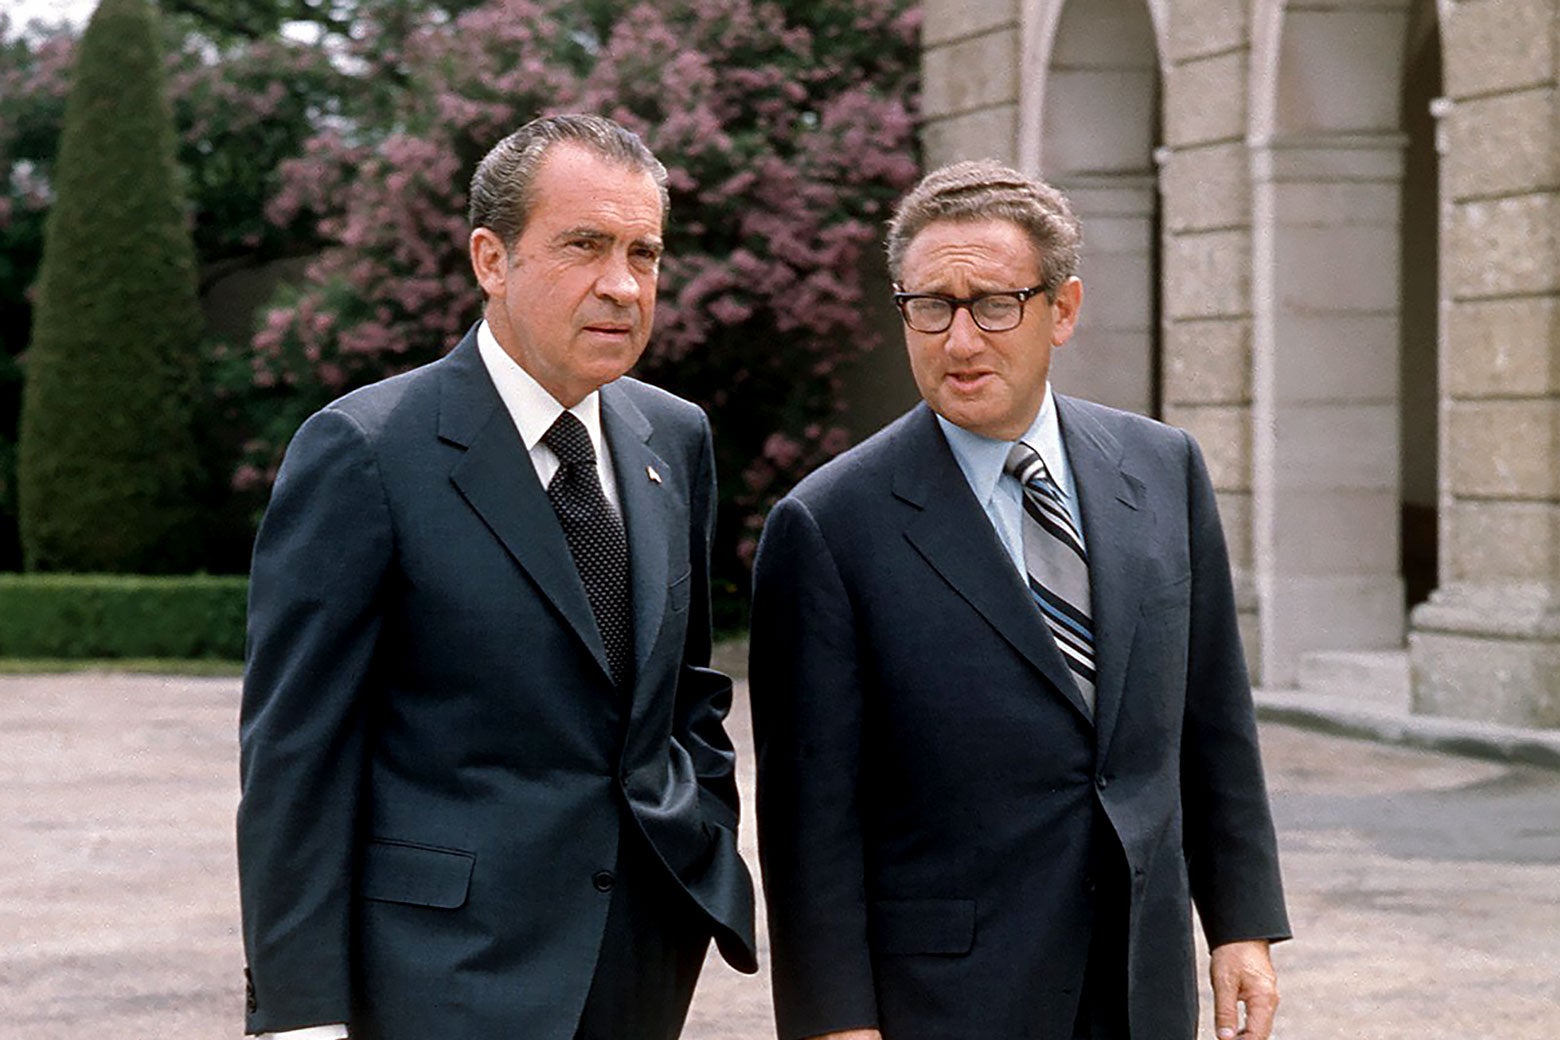 Two middle-aged white men in suits walk and talk.